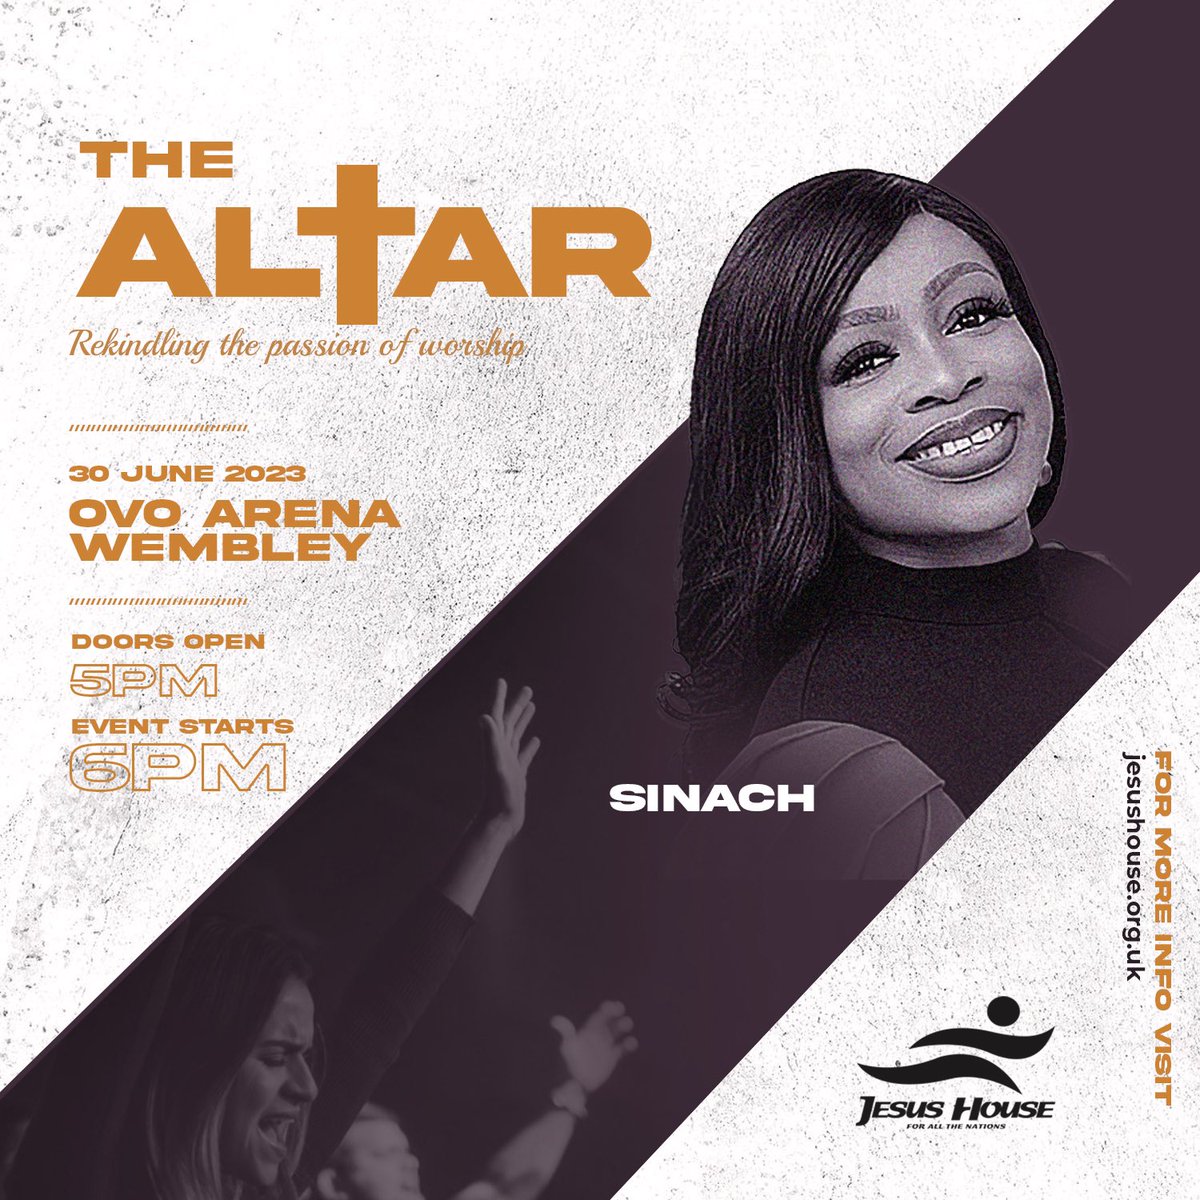 We have the lovely super anointed  @sinach worshipping with @thealtaruk this June. It’s going to be 🔥🔥🔥 #WatchThisSpace for ticket info won’t be long now…